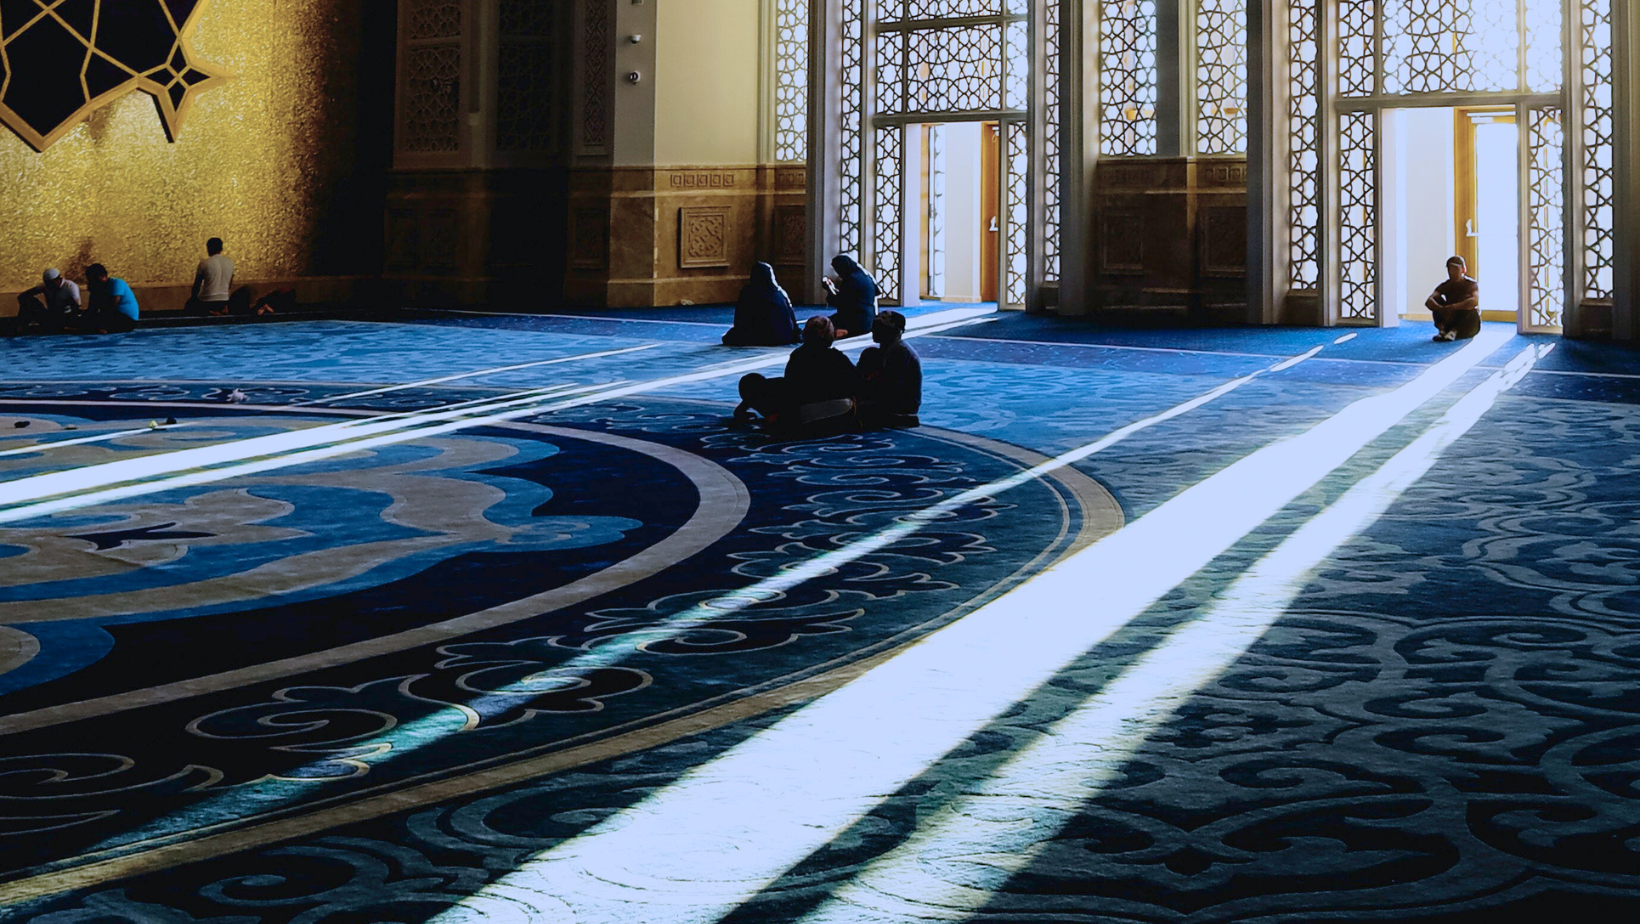 Blog title image - Muslims praying in mosque